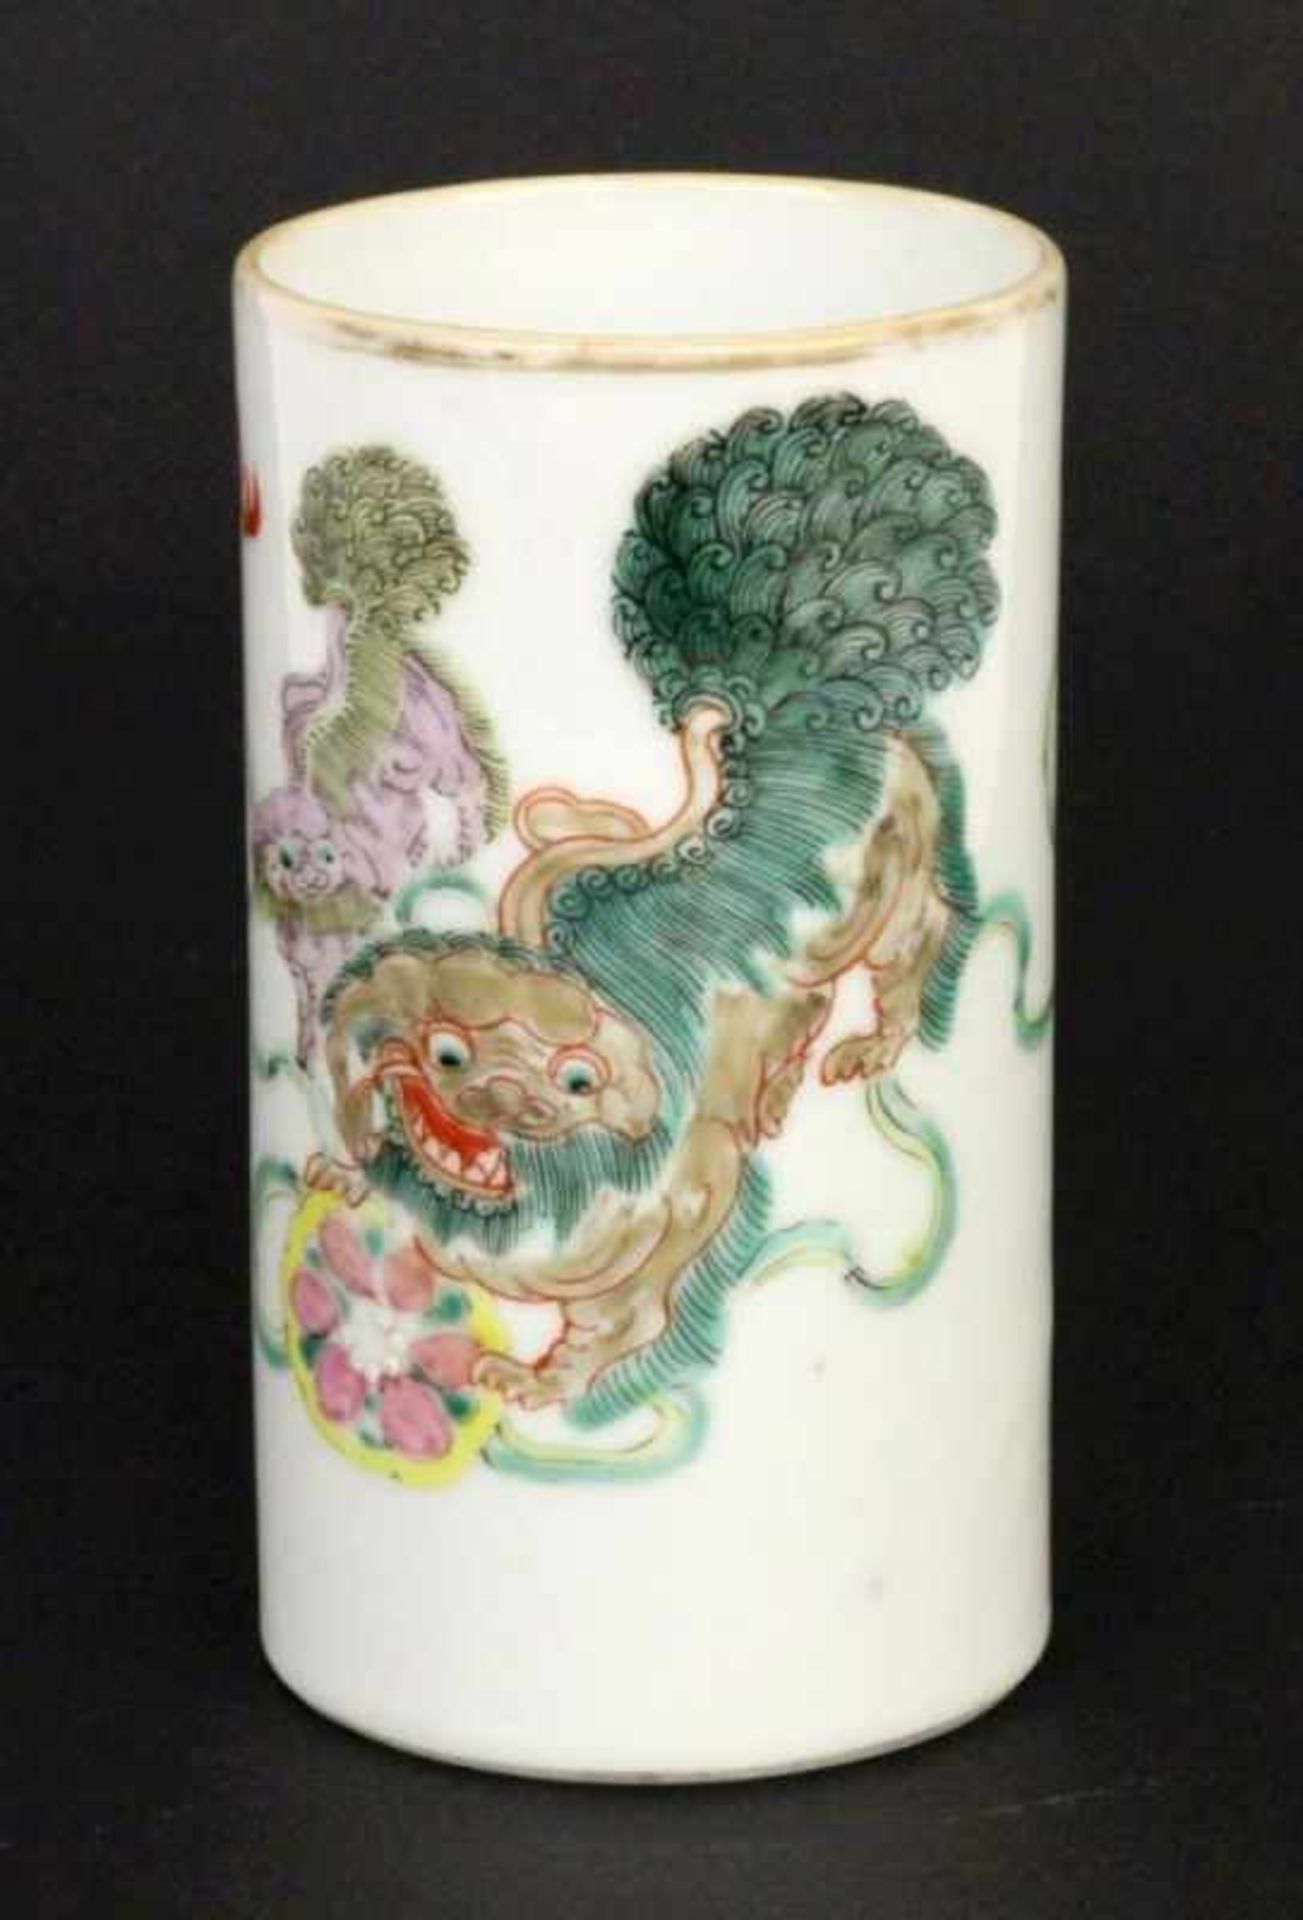 A PAINTBRUSH VASE China circa 1900 Porcelain with polychrome painting. Red maker's mark.11.5 cm